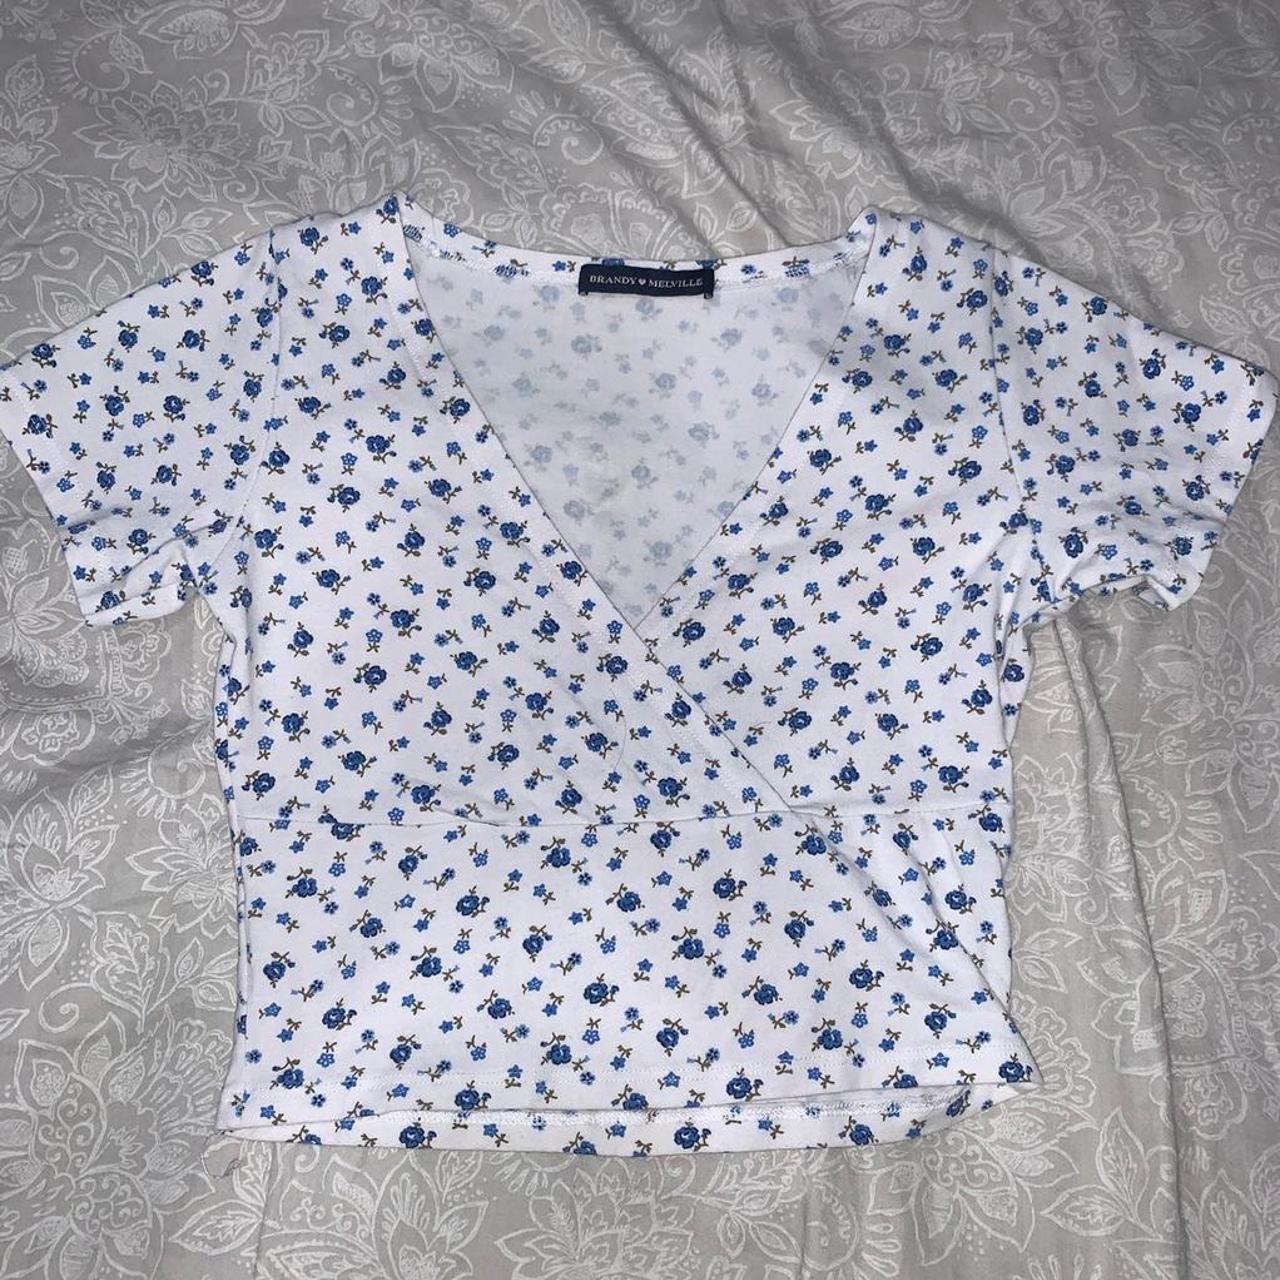 Product Image 1 - Brandy Melville Amara floral top